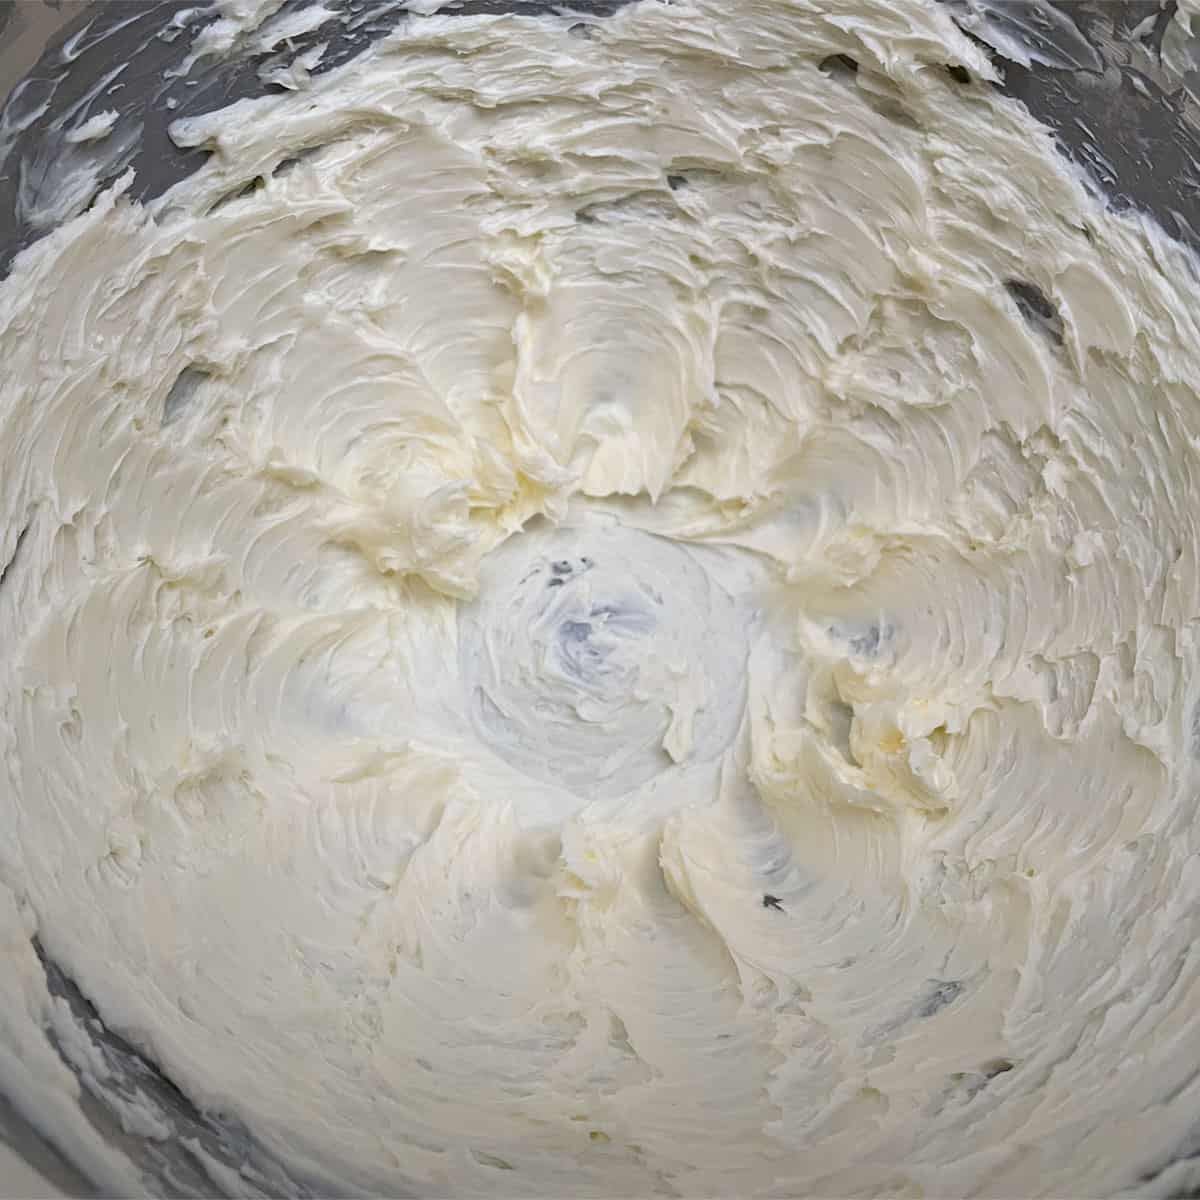 Mixer bowl with creamed butter looking like it is light and fluffy.